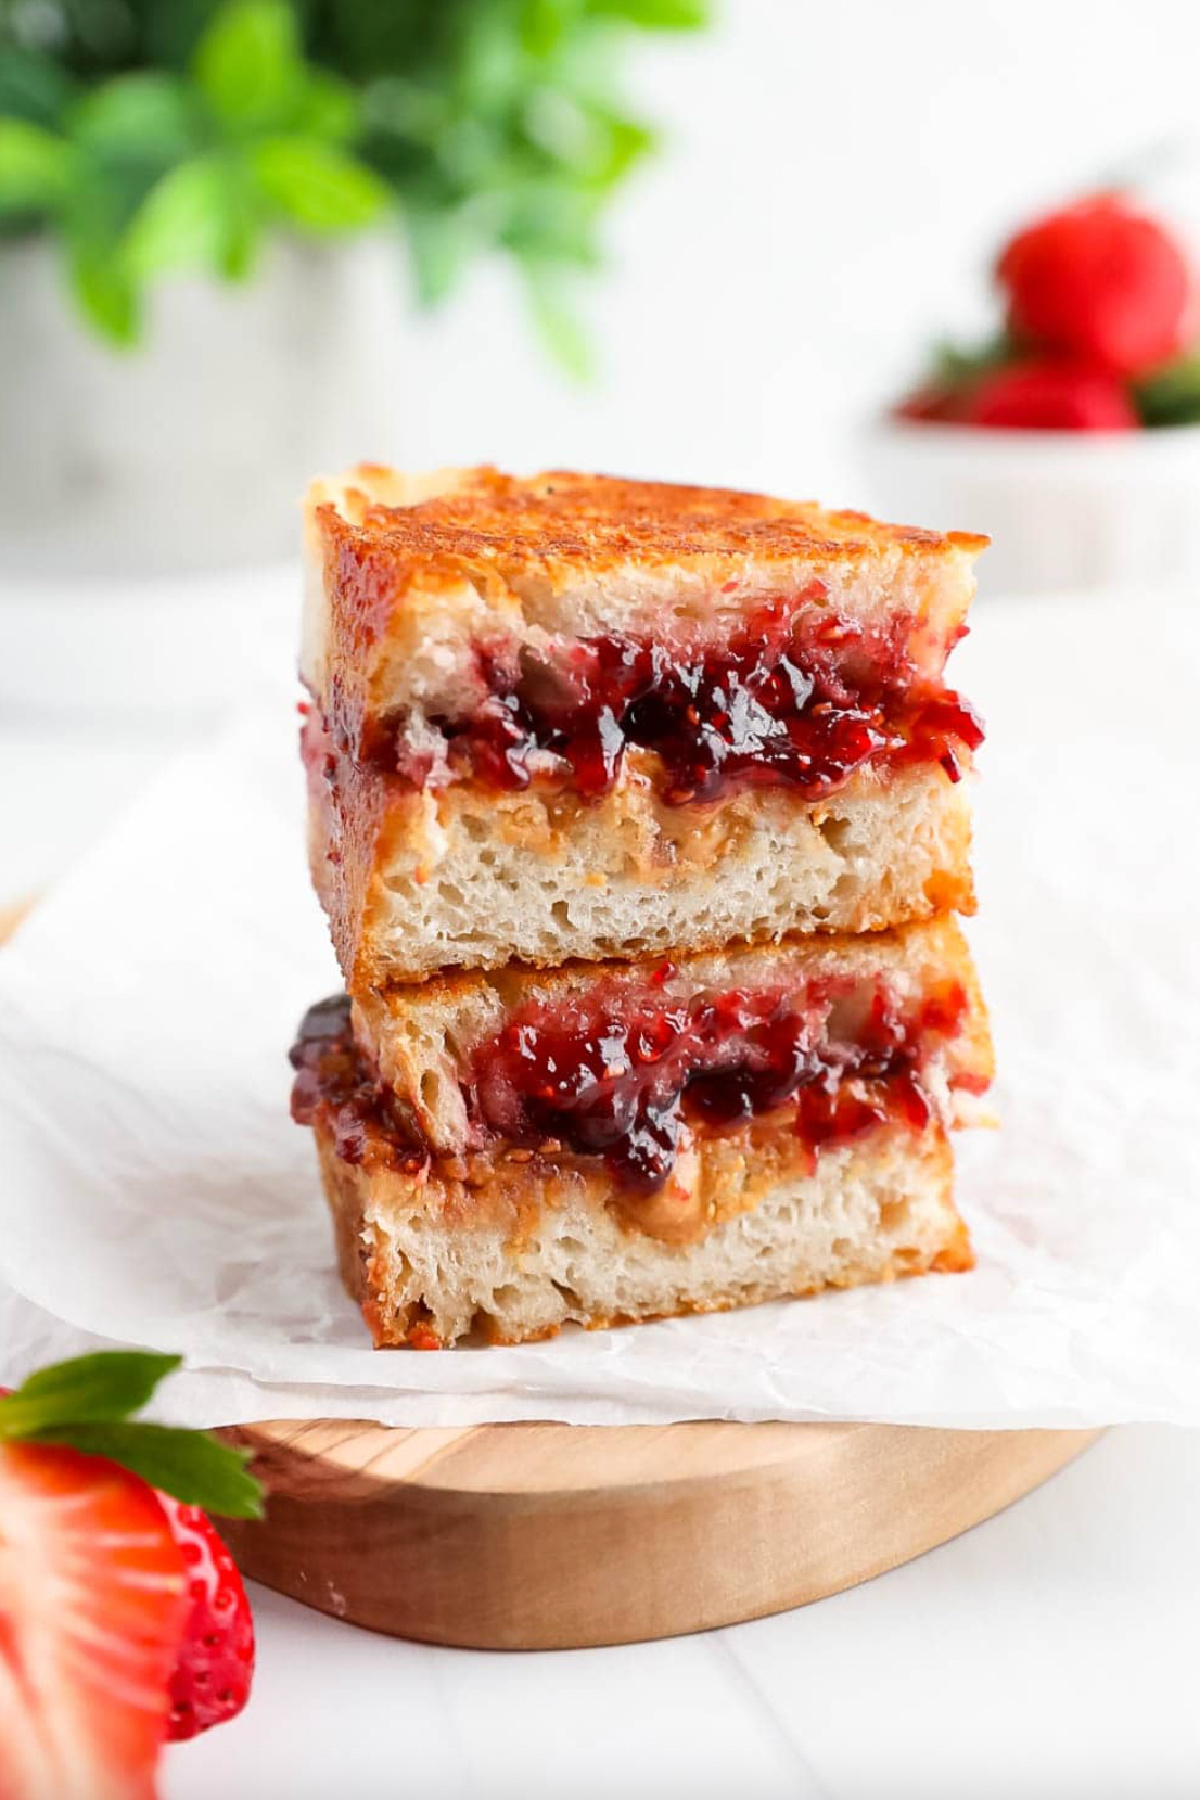 stacked fried peanut butter and jelly sandwich halves